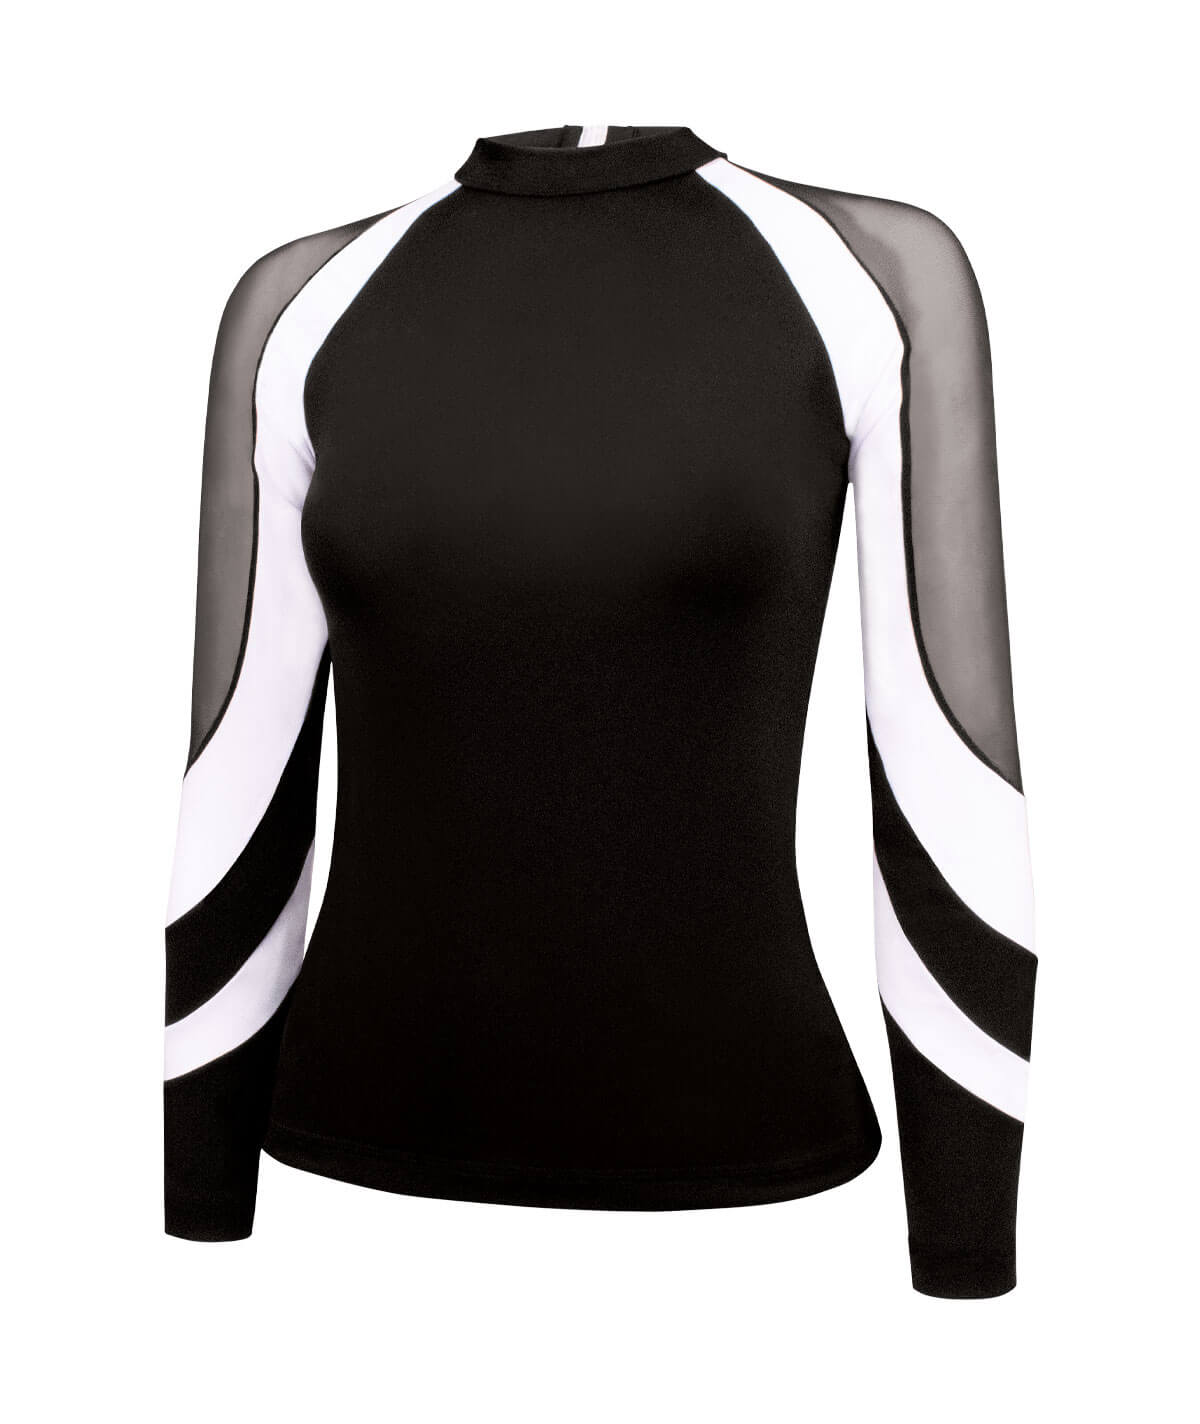 GK All Star Prodigy Top